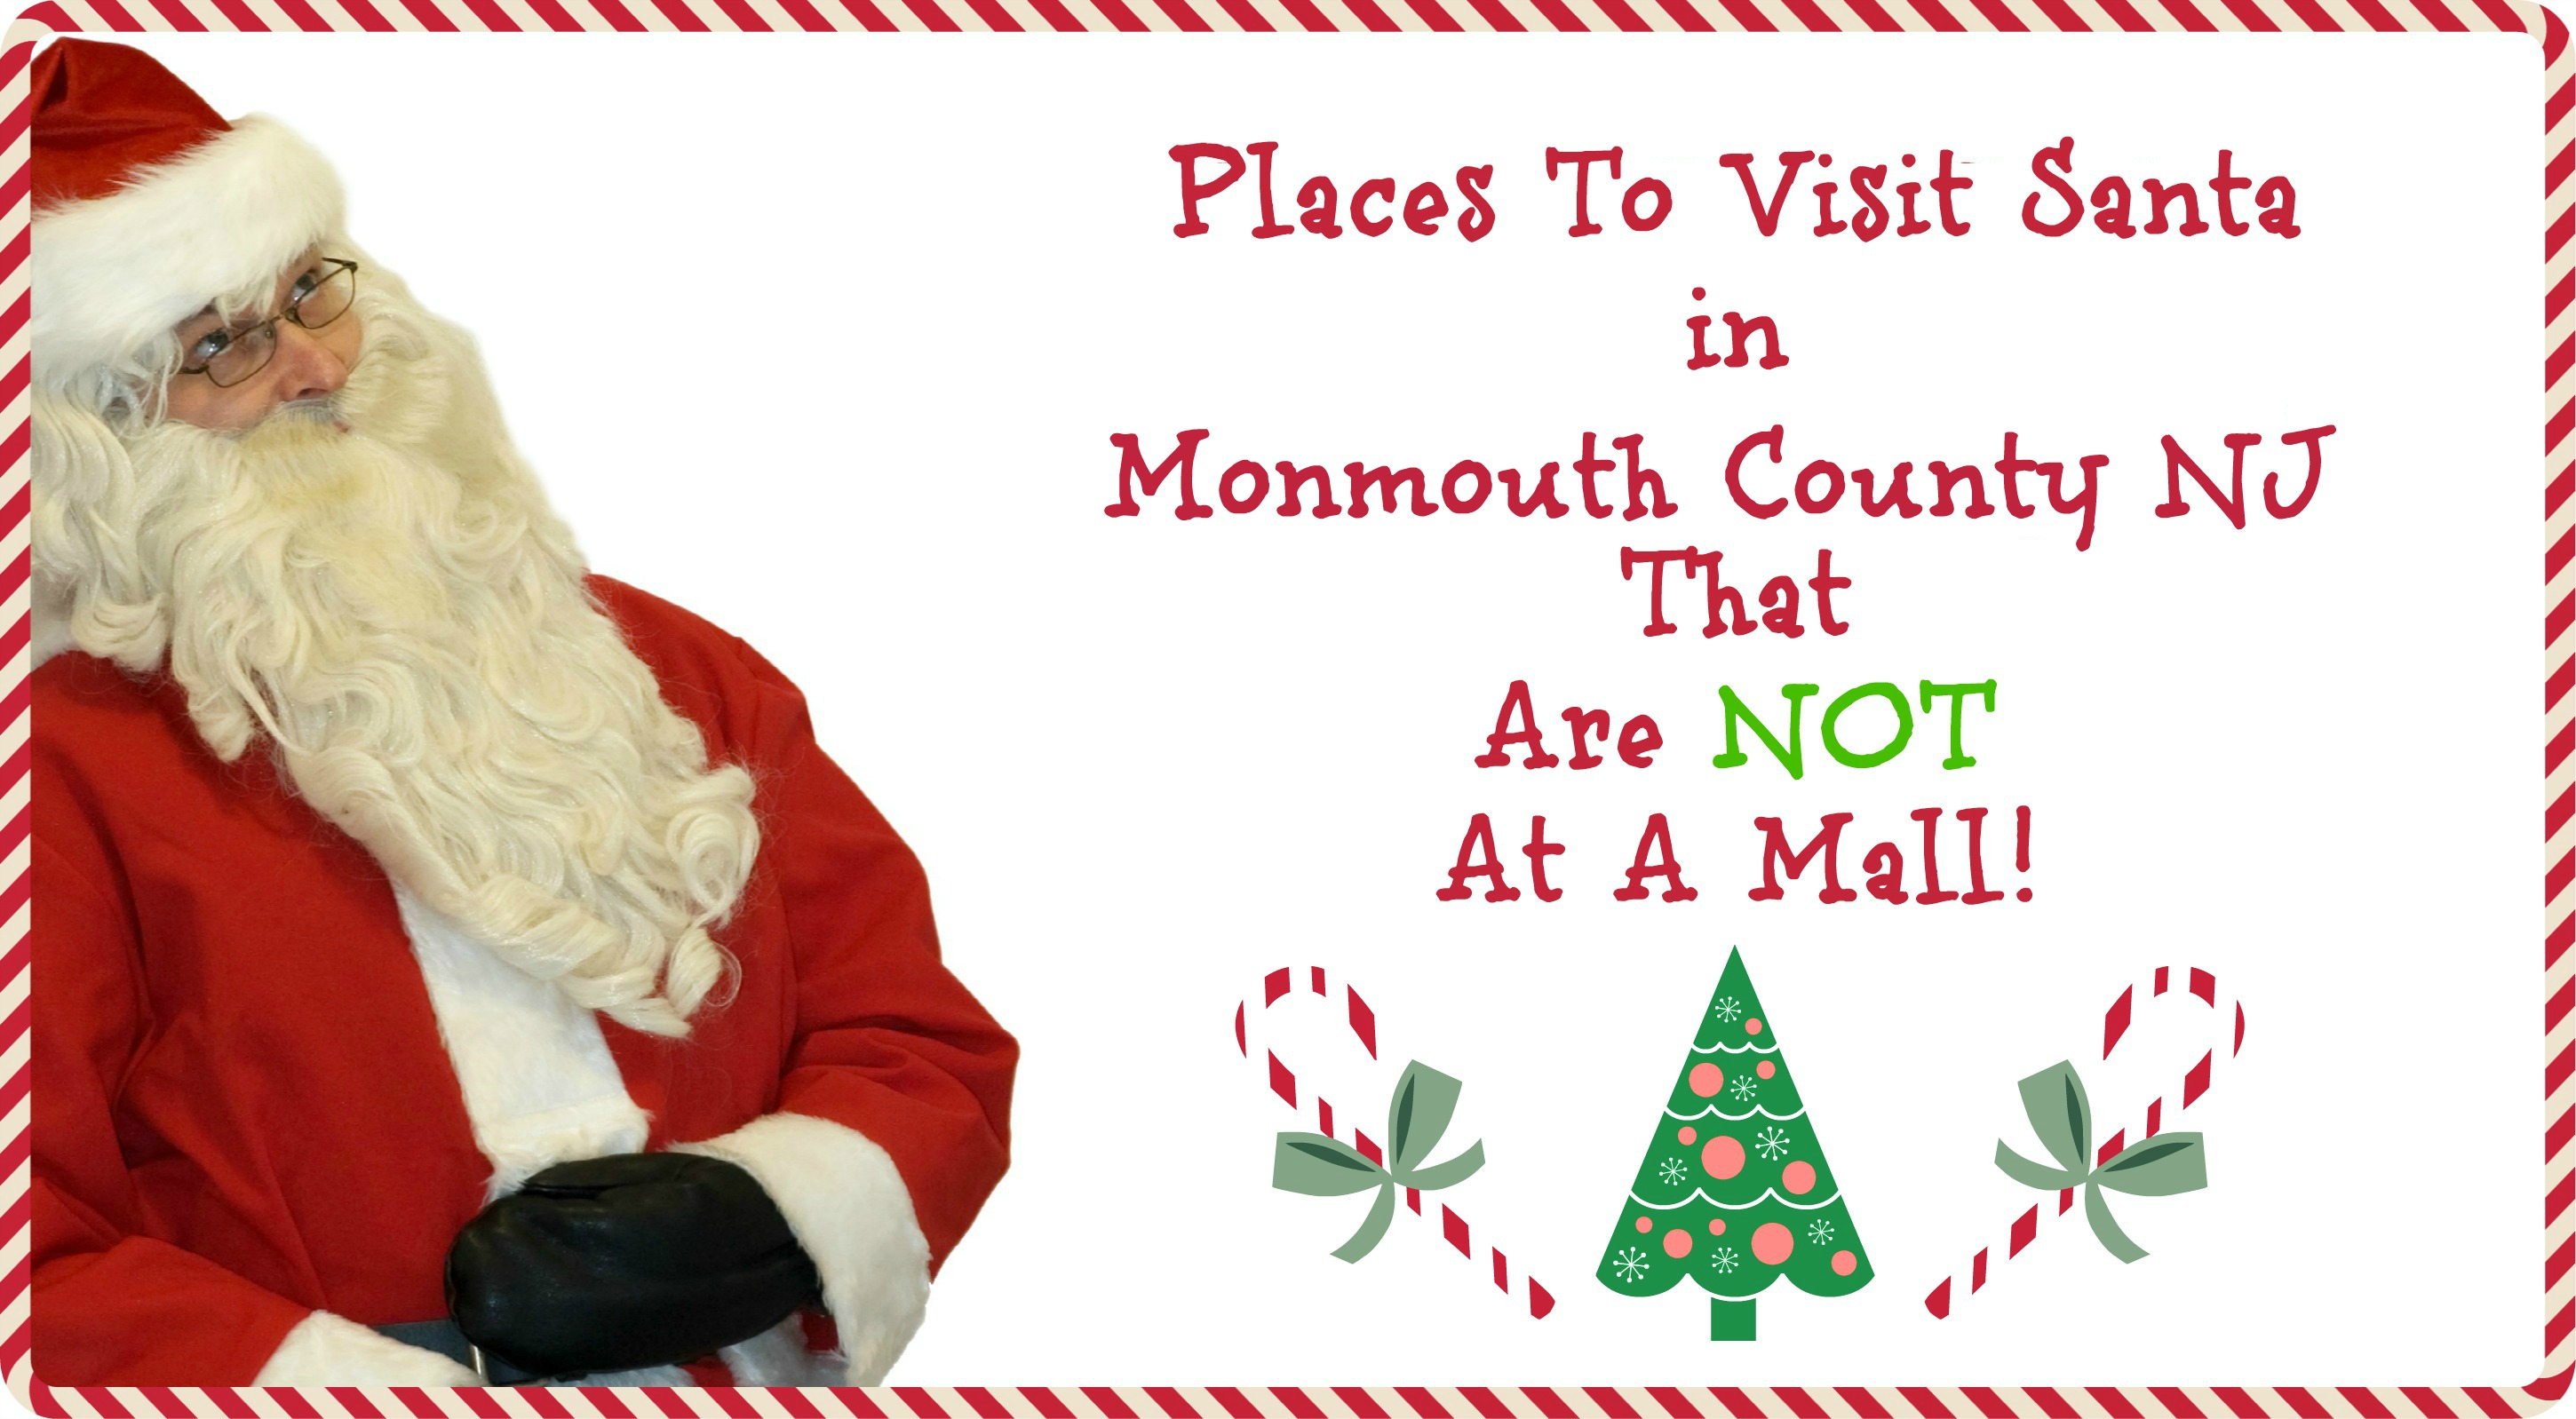 Places to Visit Santa in Monmouth County NJ That Are NOT A Mall